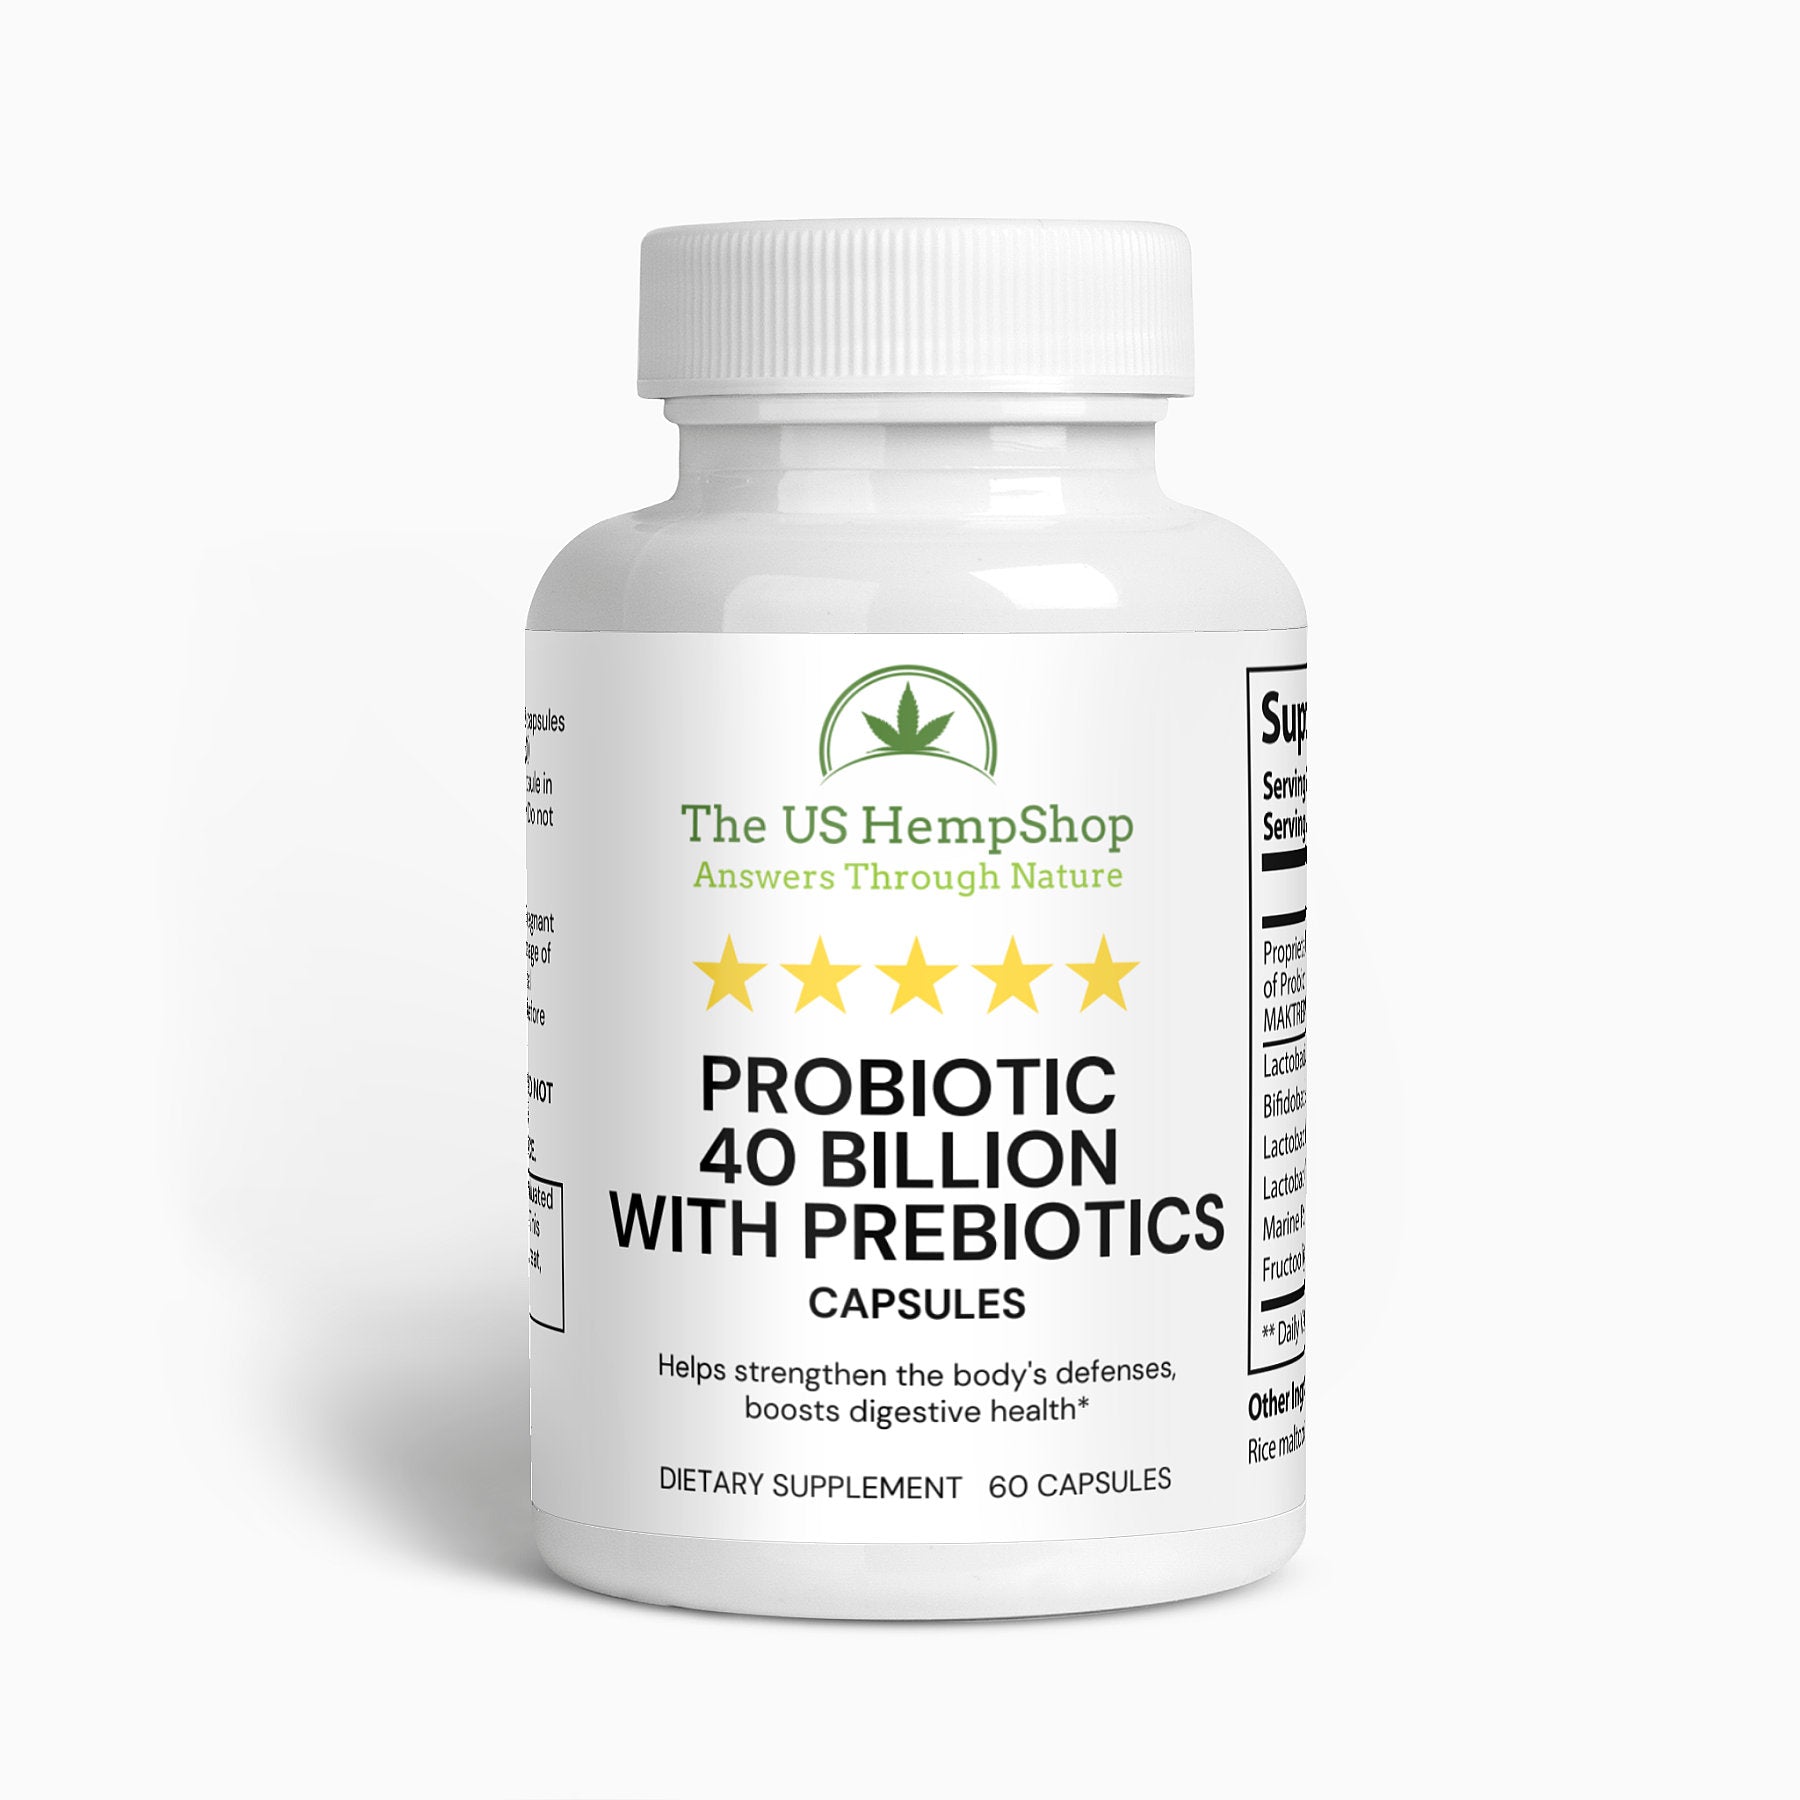 Super powered pro and prebiotics with 40 billion CFM to help your digestive health in ways that will benefit you greatly. We know you will love them!